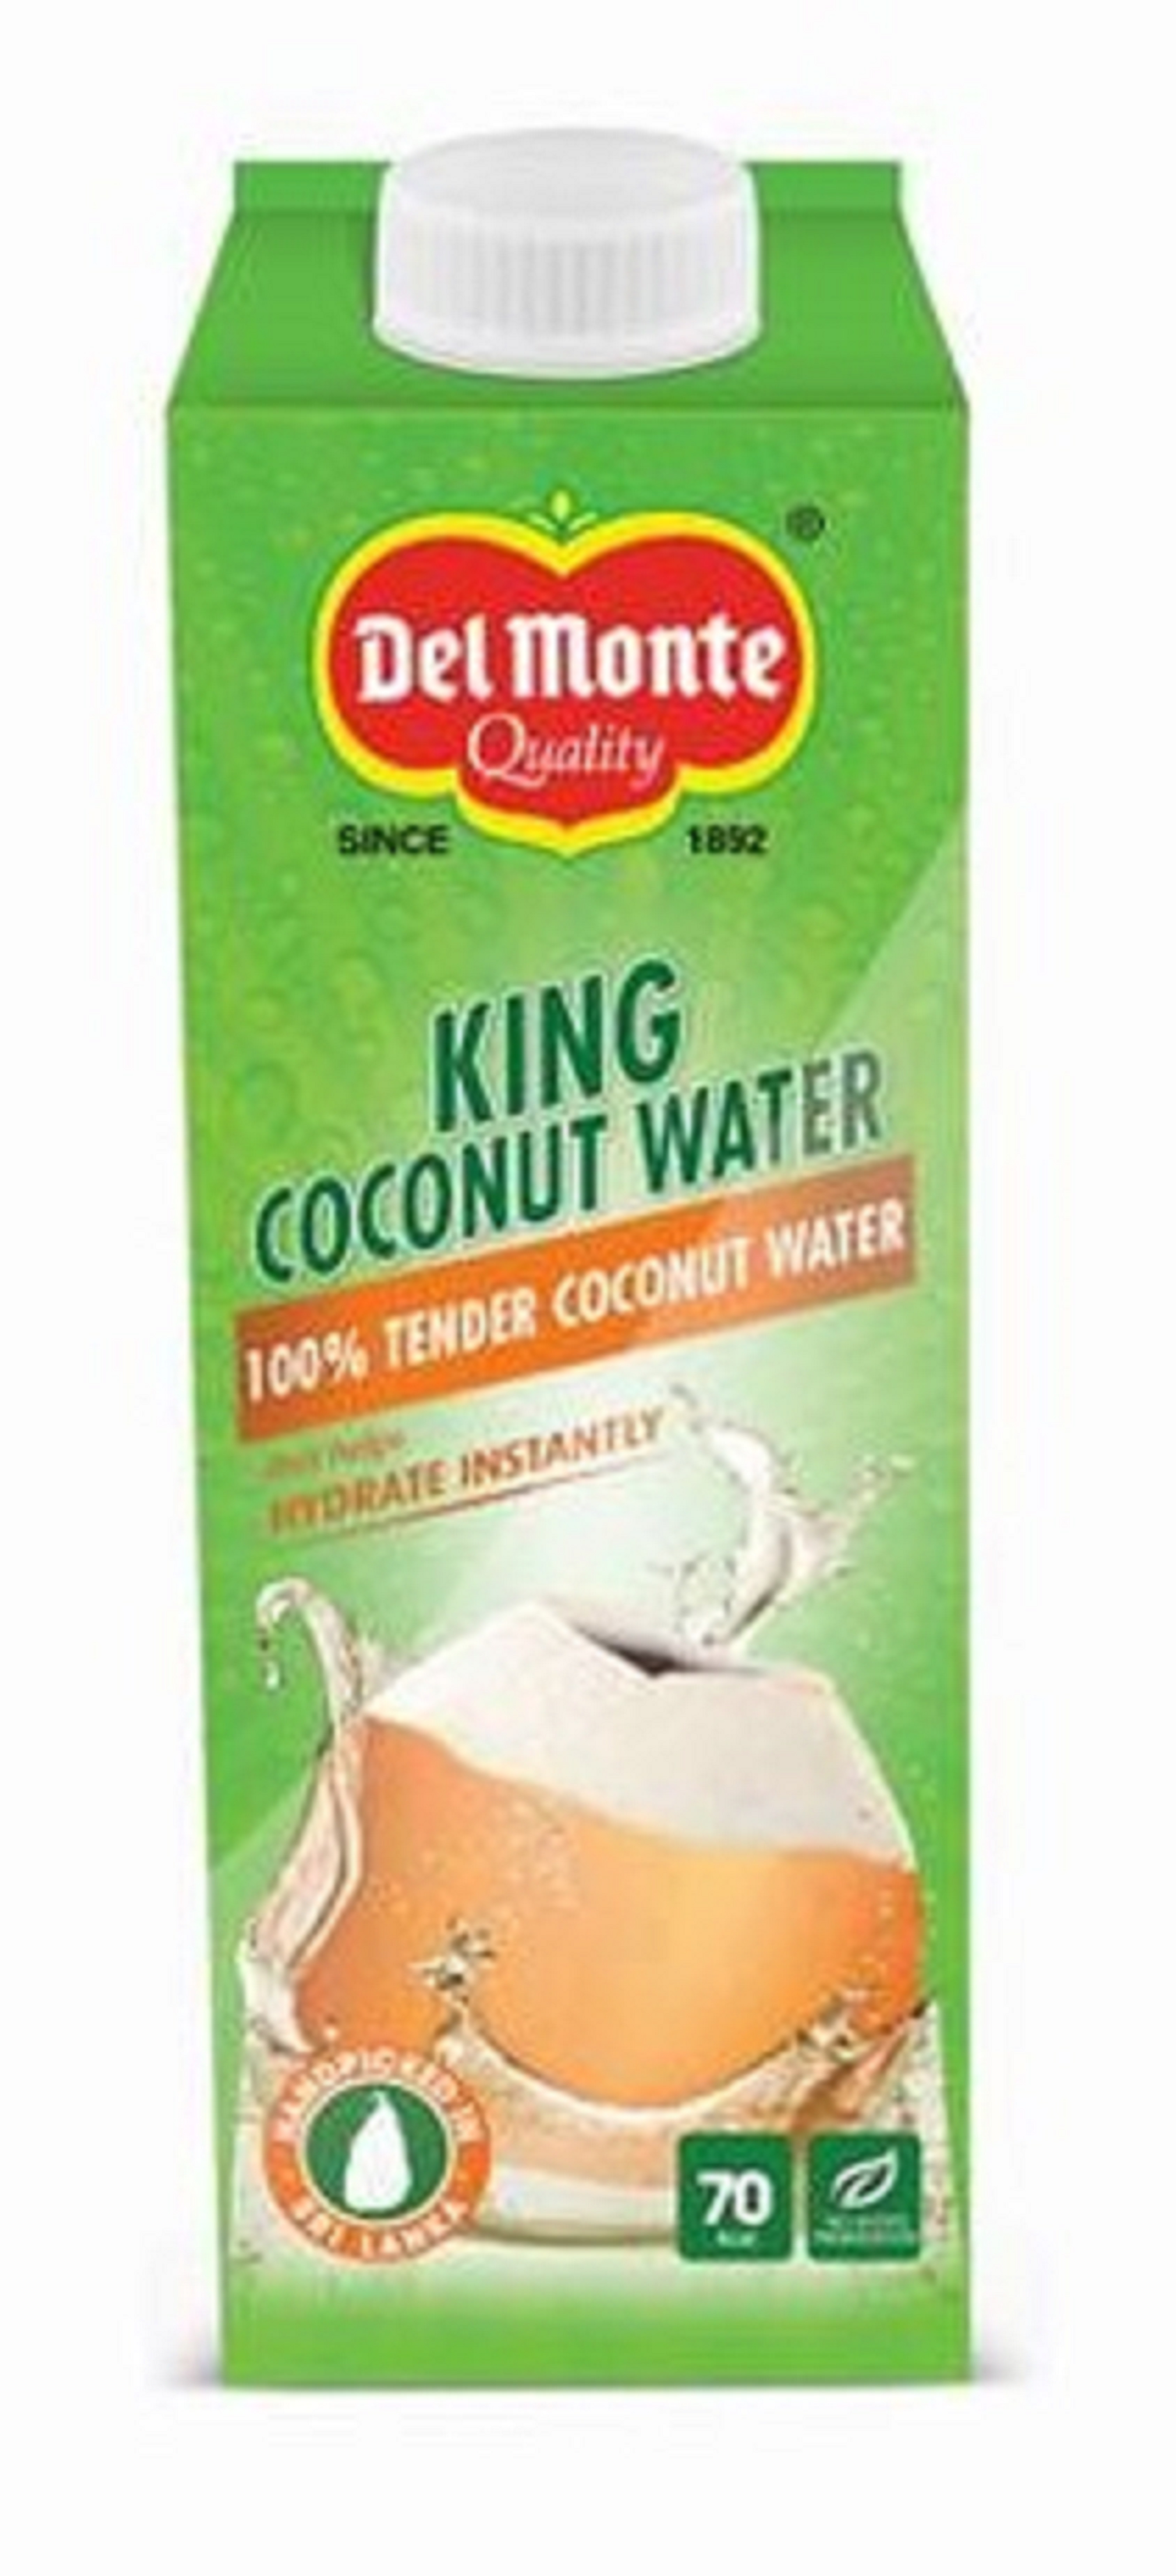 Del Monte launches India’s first packaged King Coconut Water decoding=